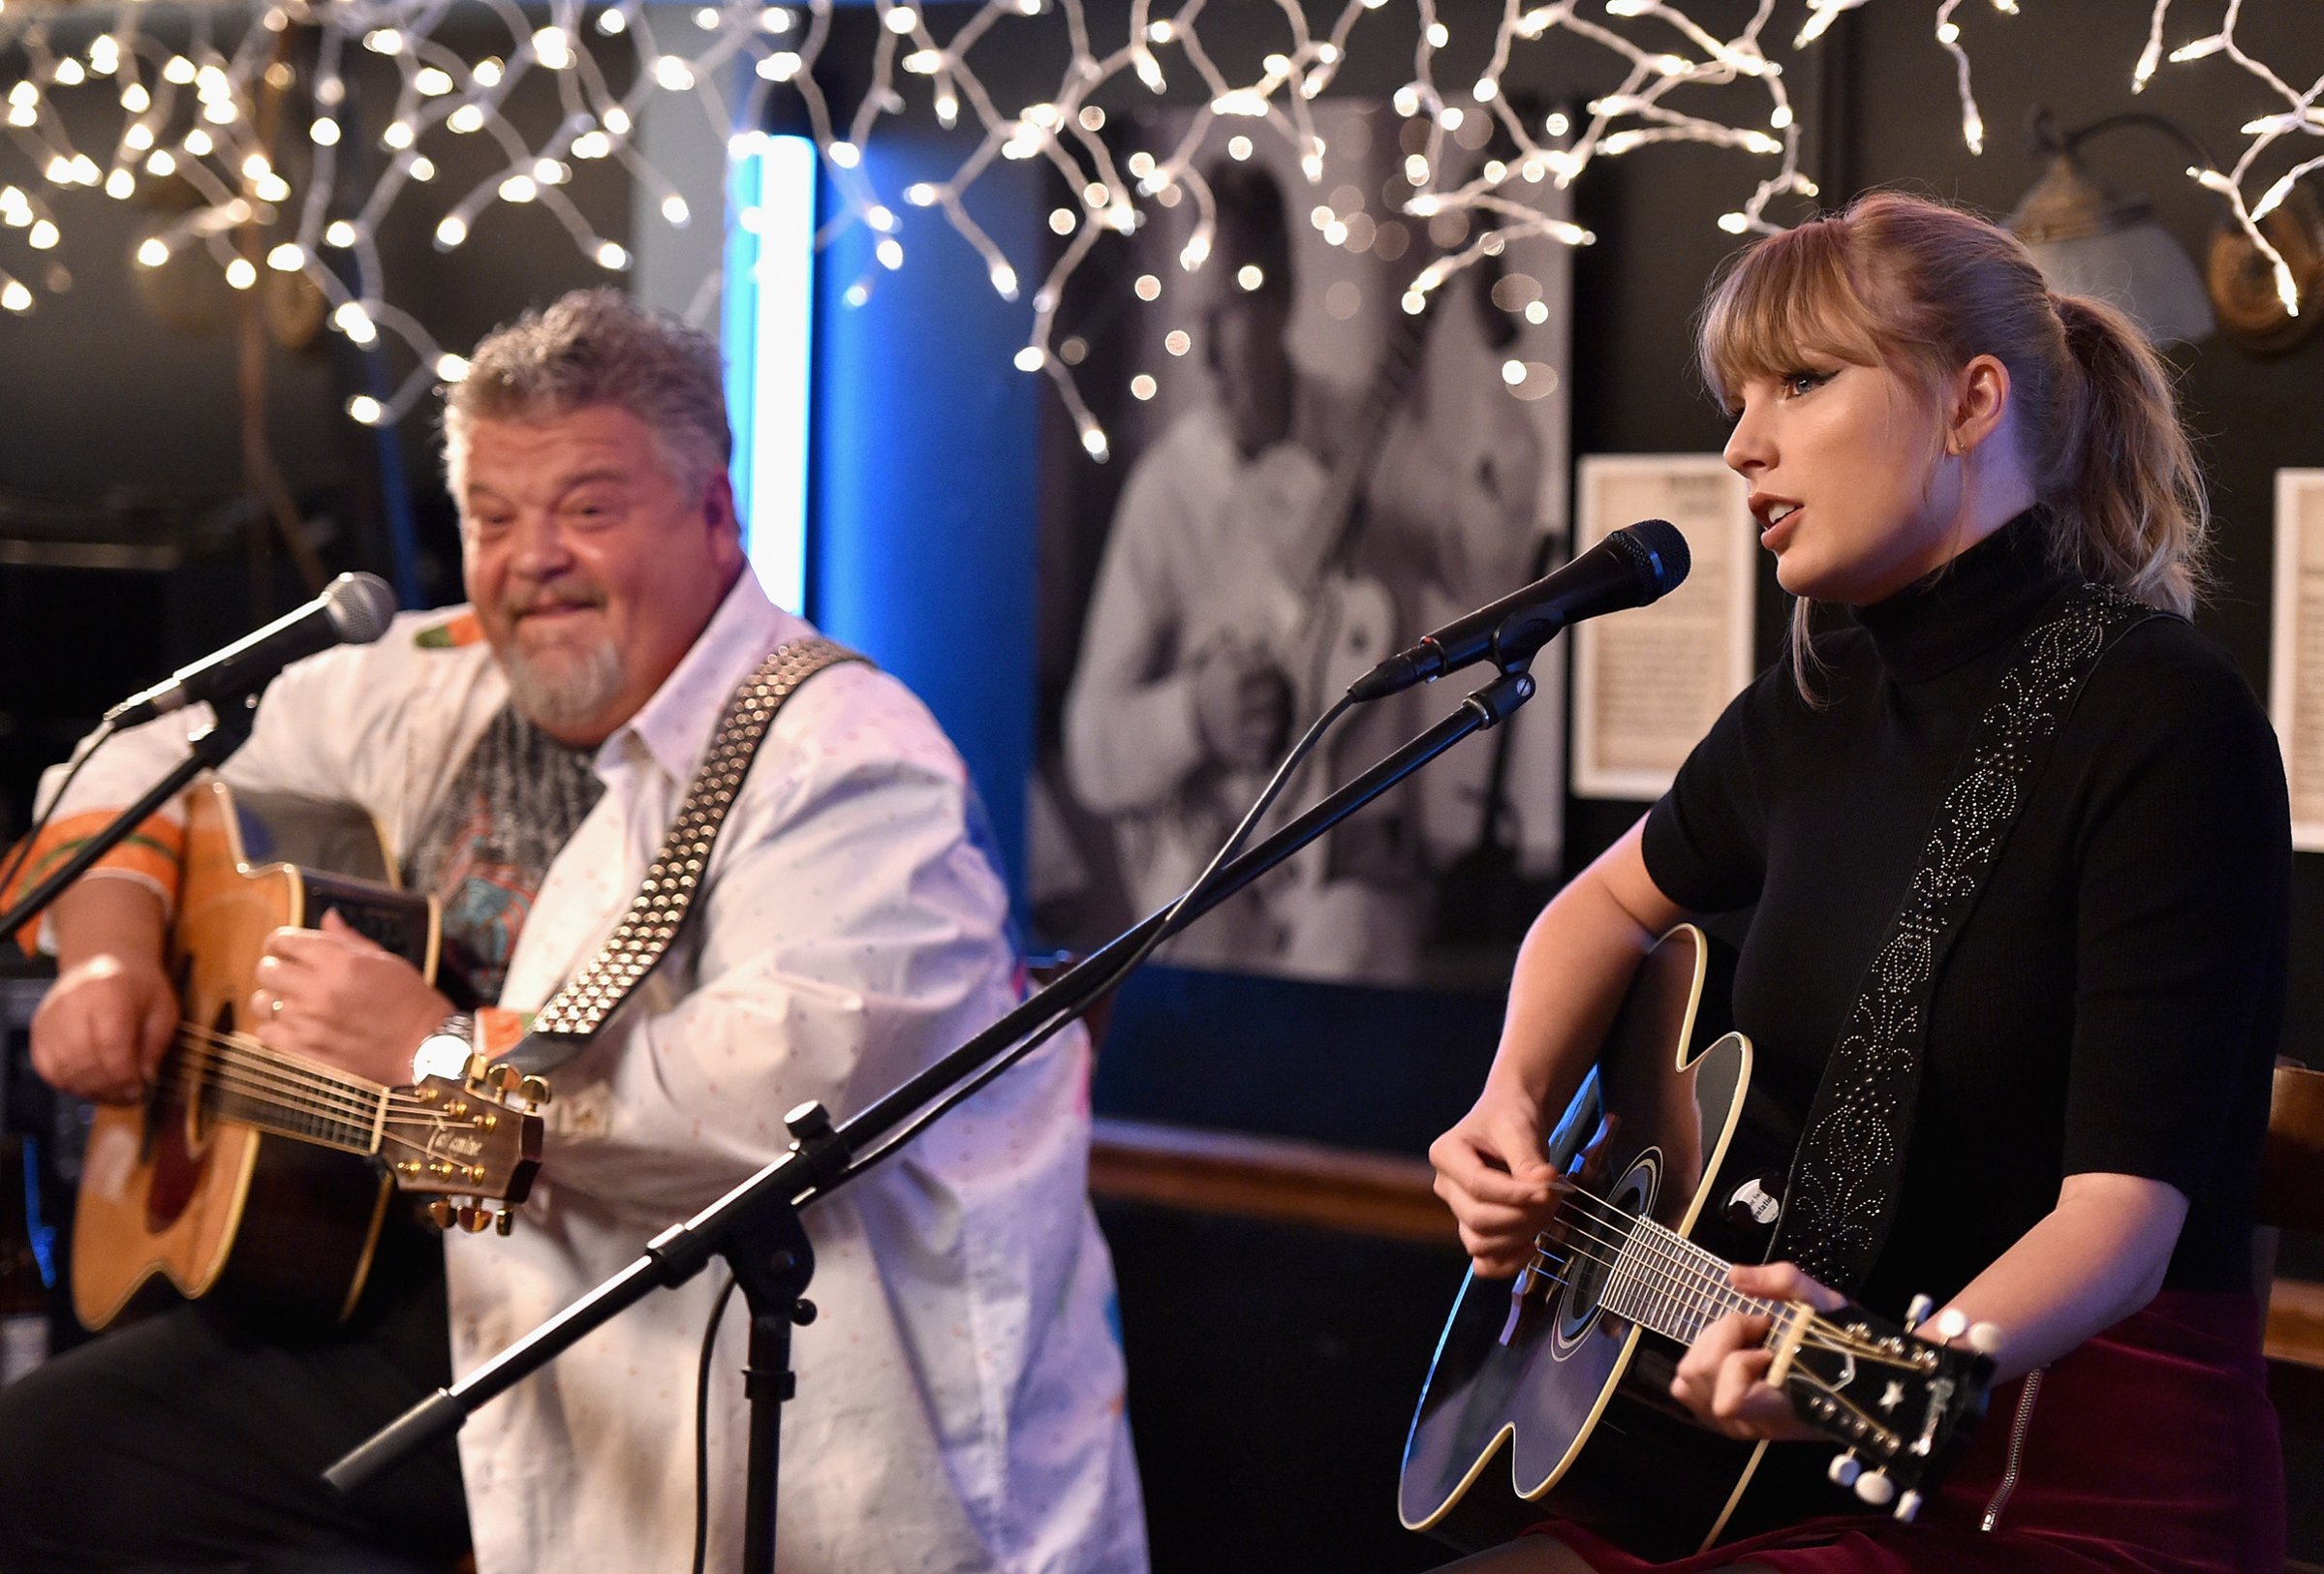 Craig Wiseman and special guest Taylor Swift perform onstage at Bluebird Cafe on March 31, 2018 in Nashville.